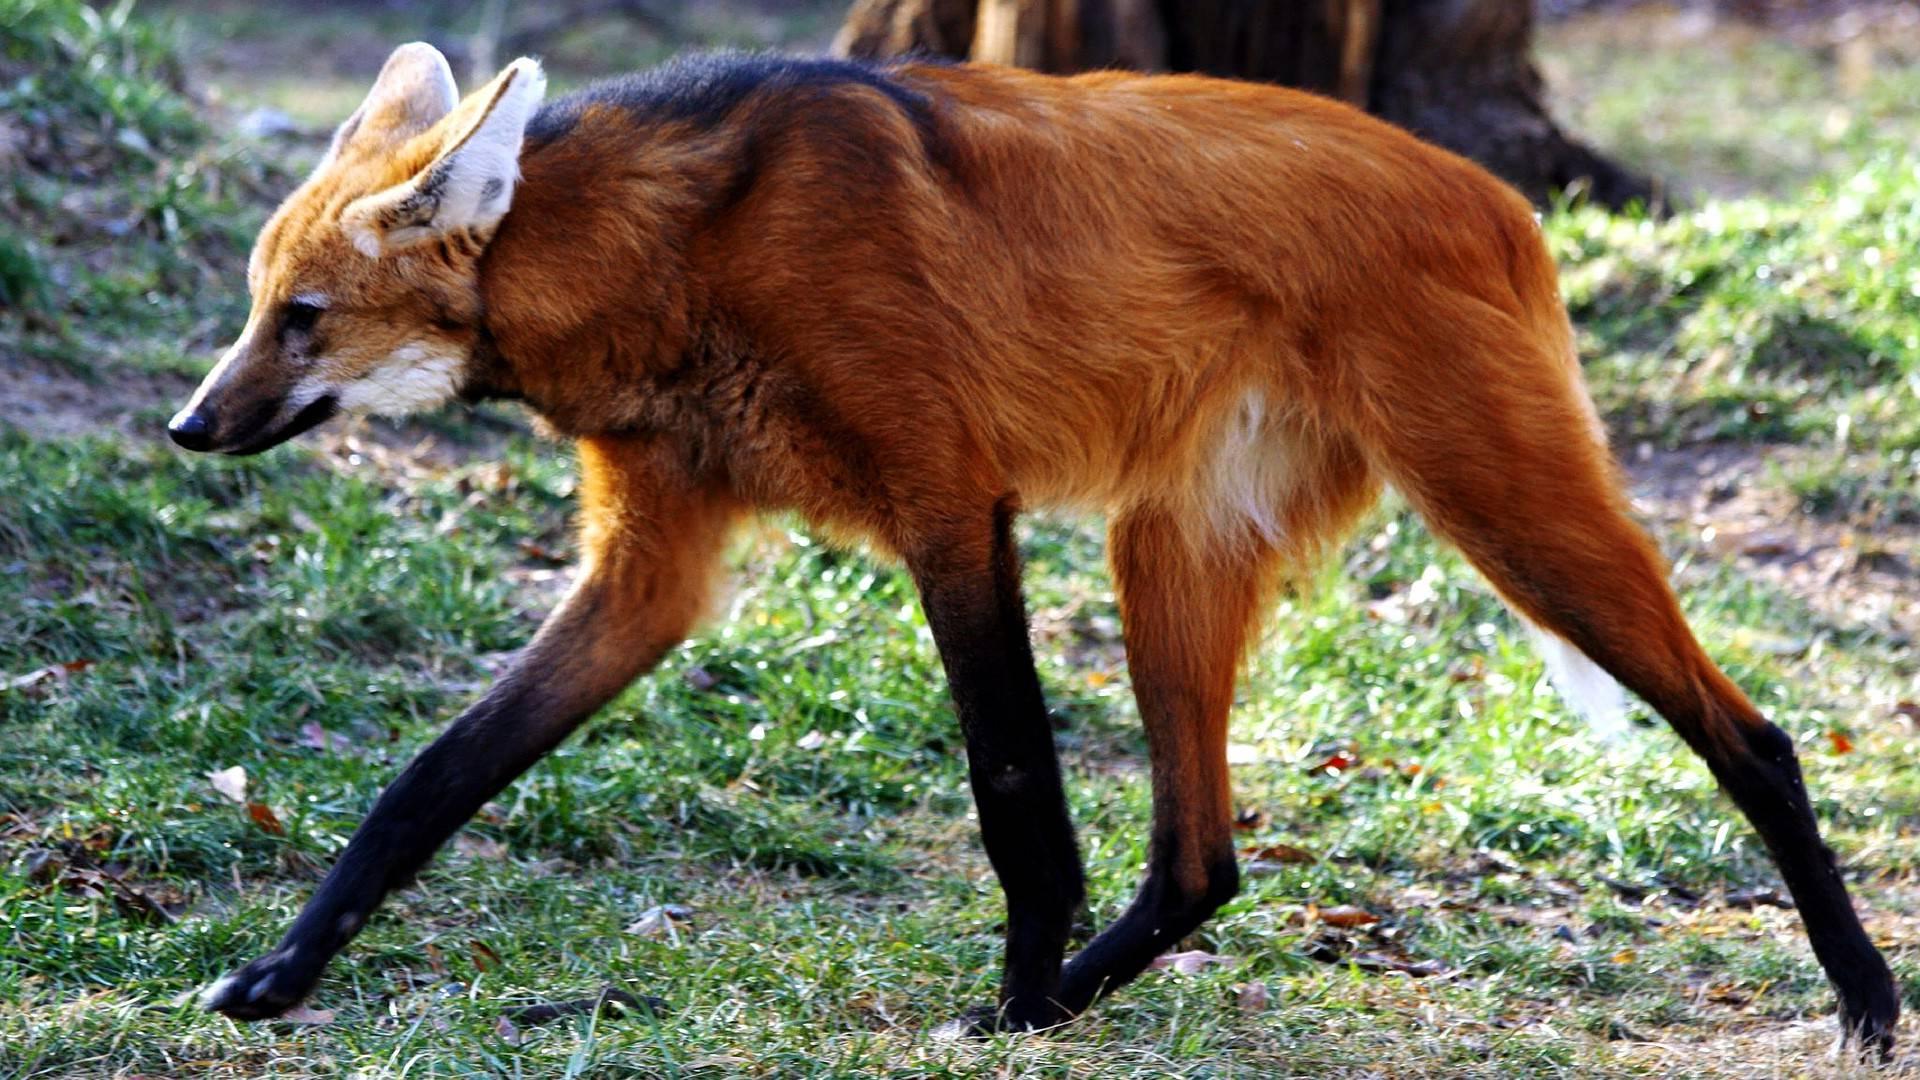 Interesting animal of the day: The Maned Wolf